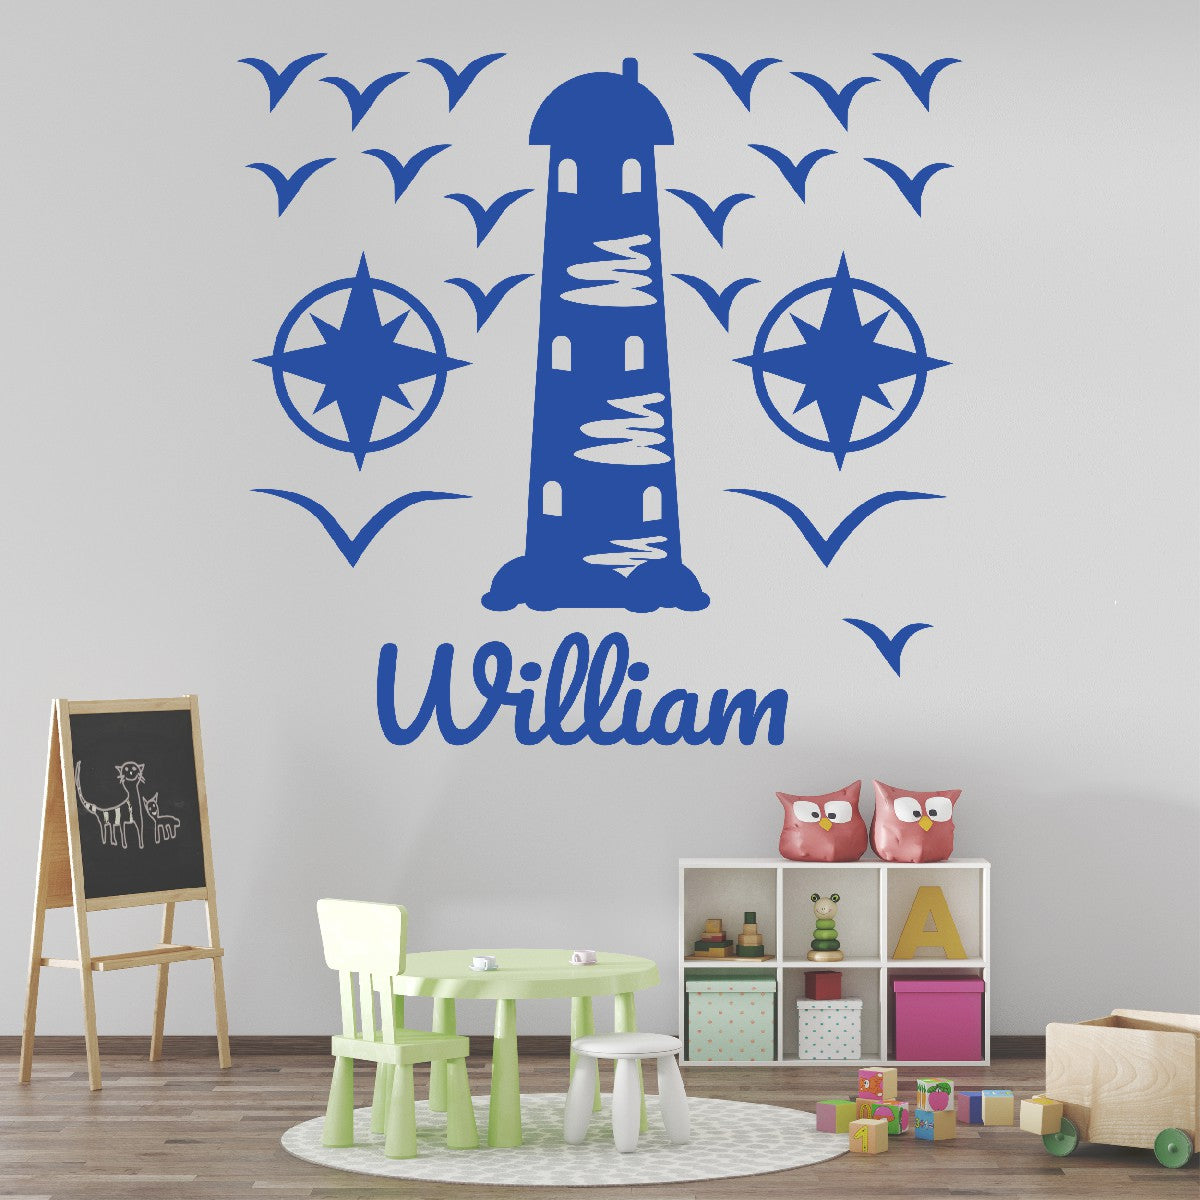 Personalized Name Stickers with Lighthouse Compass Seagull - Easily-Applied Name Decals for Walls Furniture Laptop - Unique Custom Name Stickers for Kids Bedroom